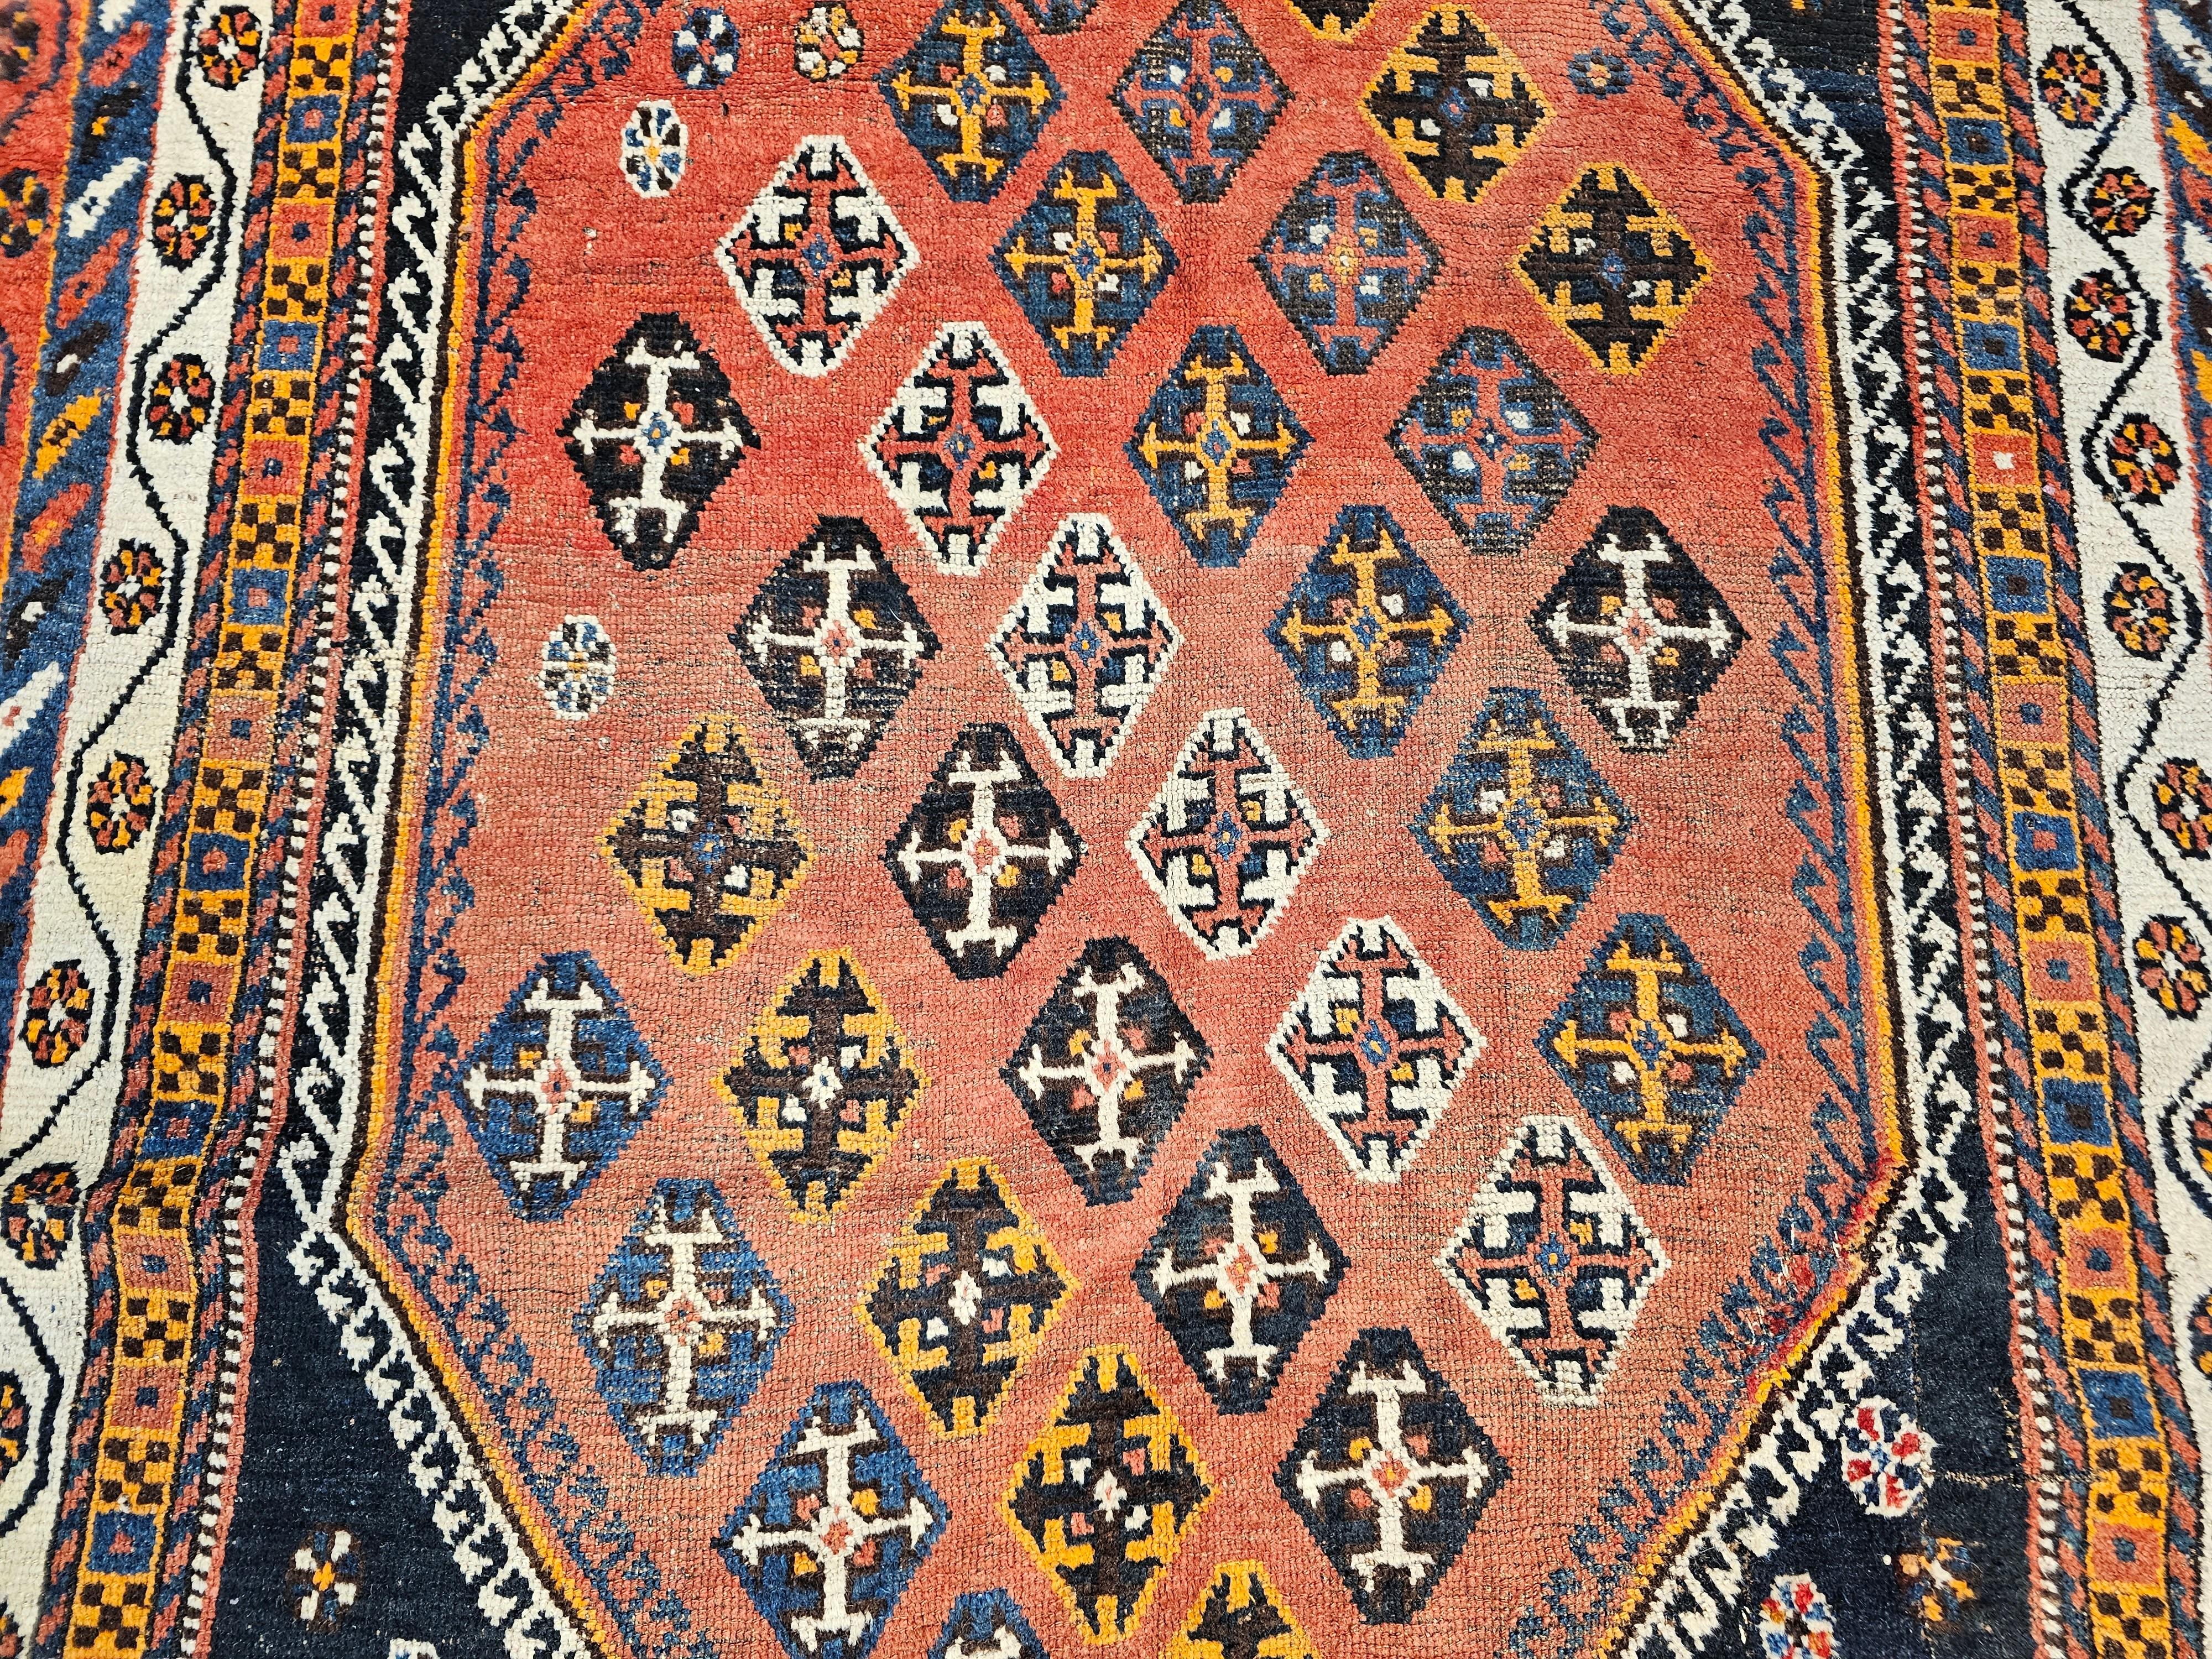 Vintage Persian Qashqai Tribal Area Rug in Rust, Ivory, Blue, Yellow, Black For Sale 5